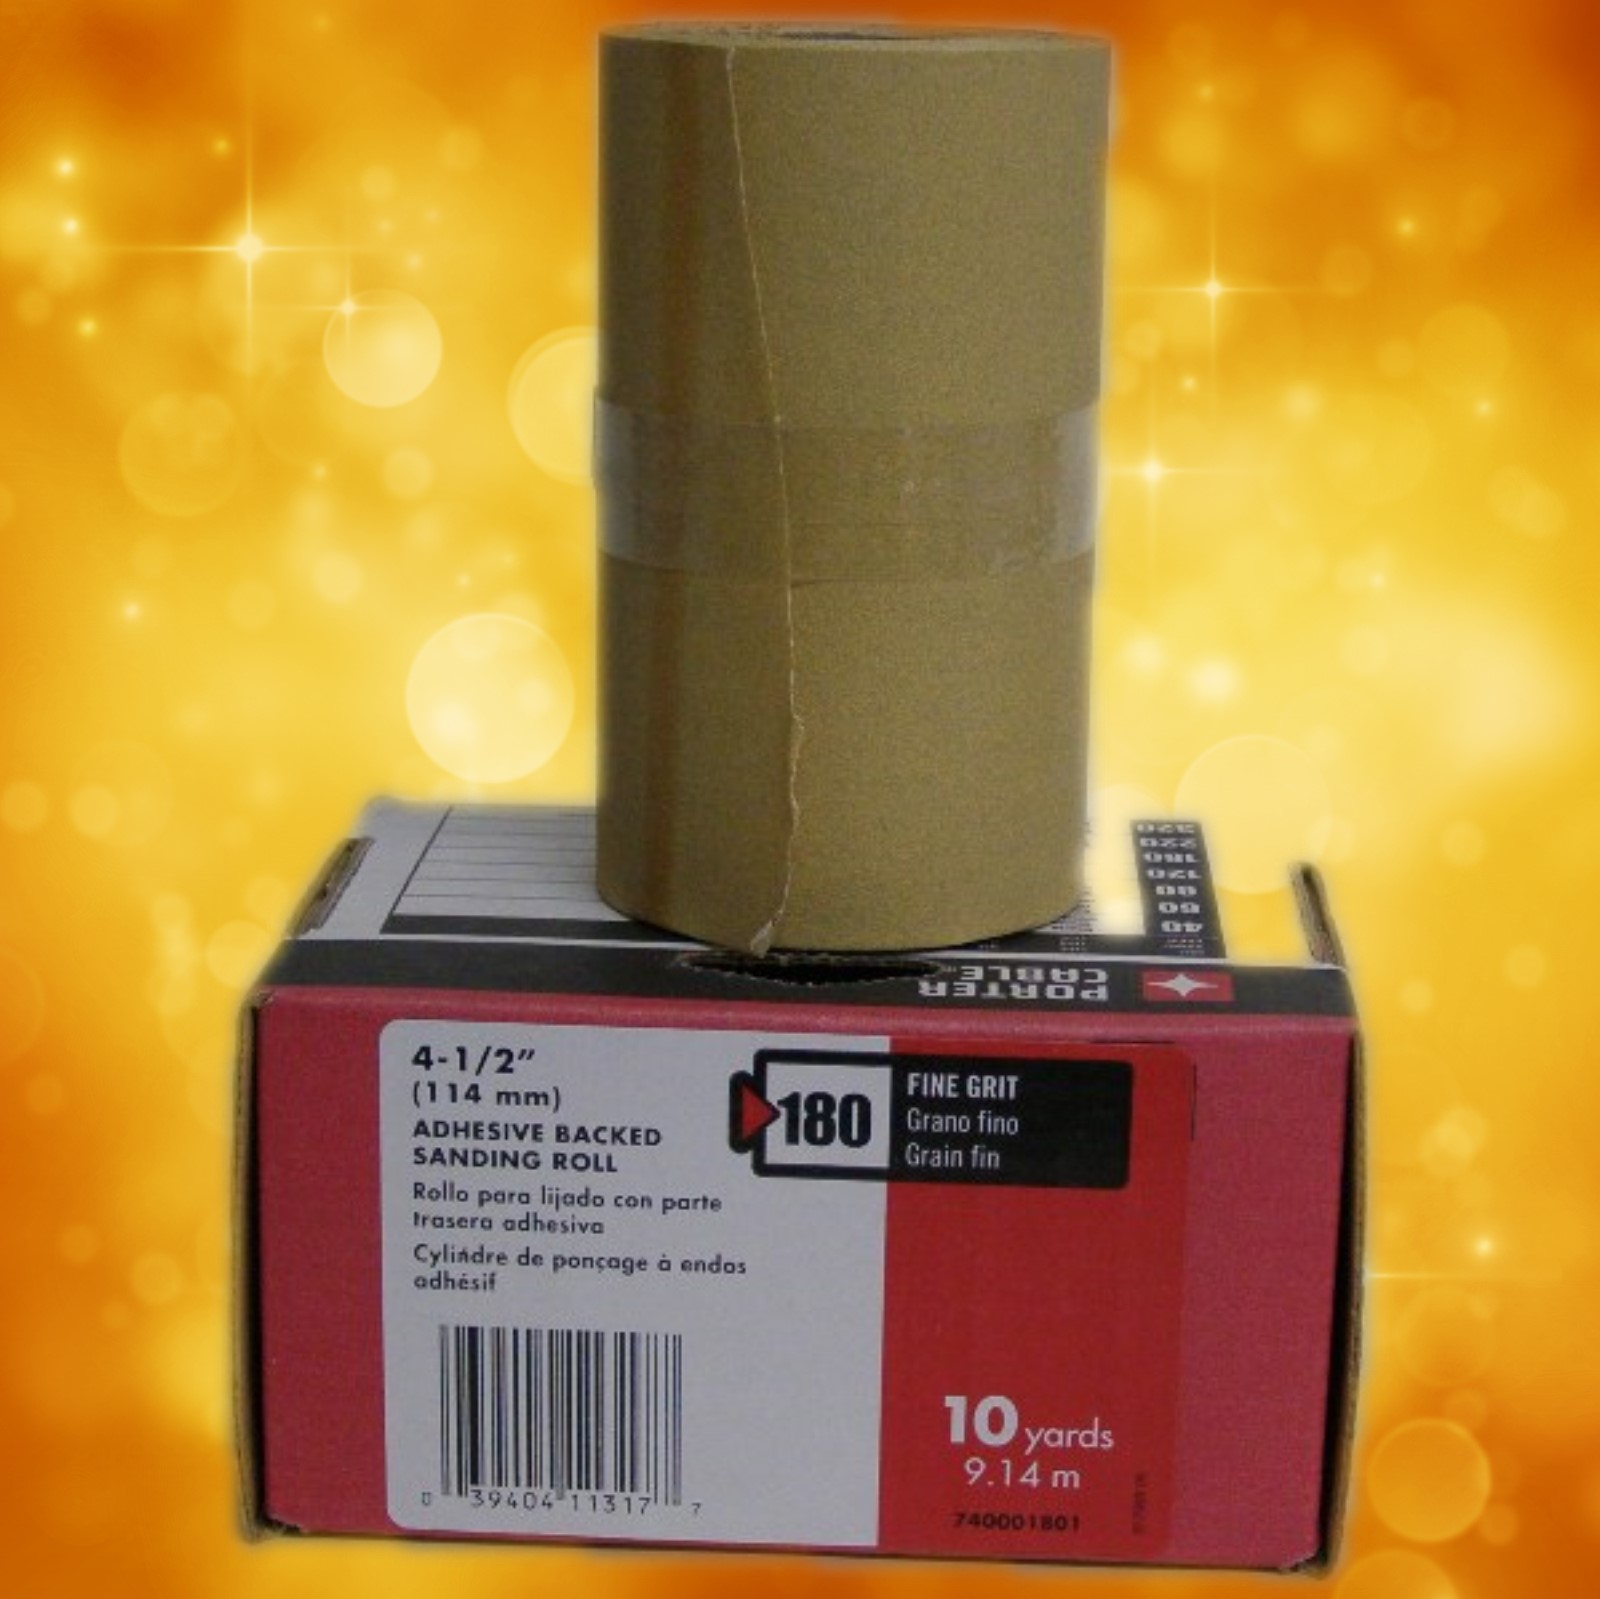 Porter-Cable 4-1/2&quot; x 10 Yard, Adhesive-Backed Sanding Roll - 180 Grit 740001801